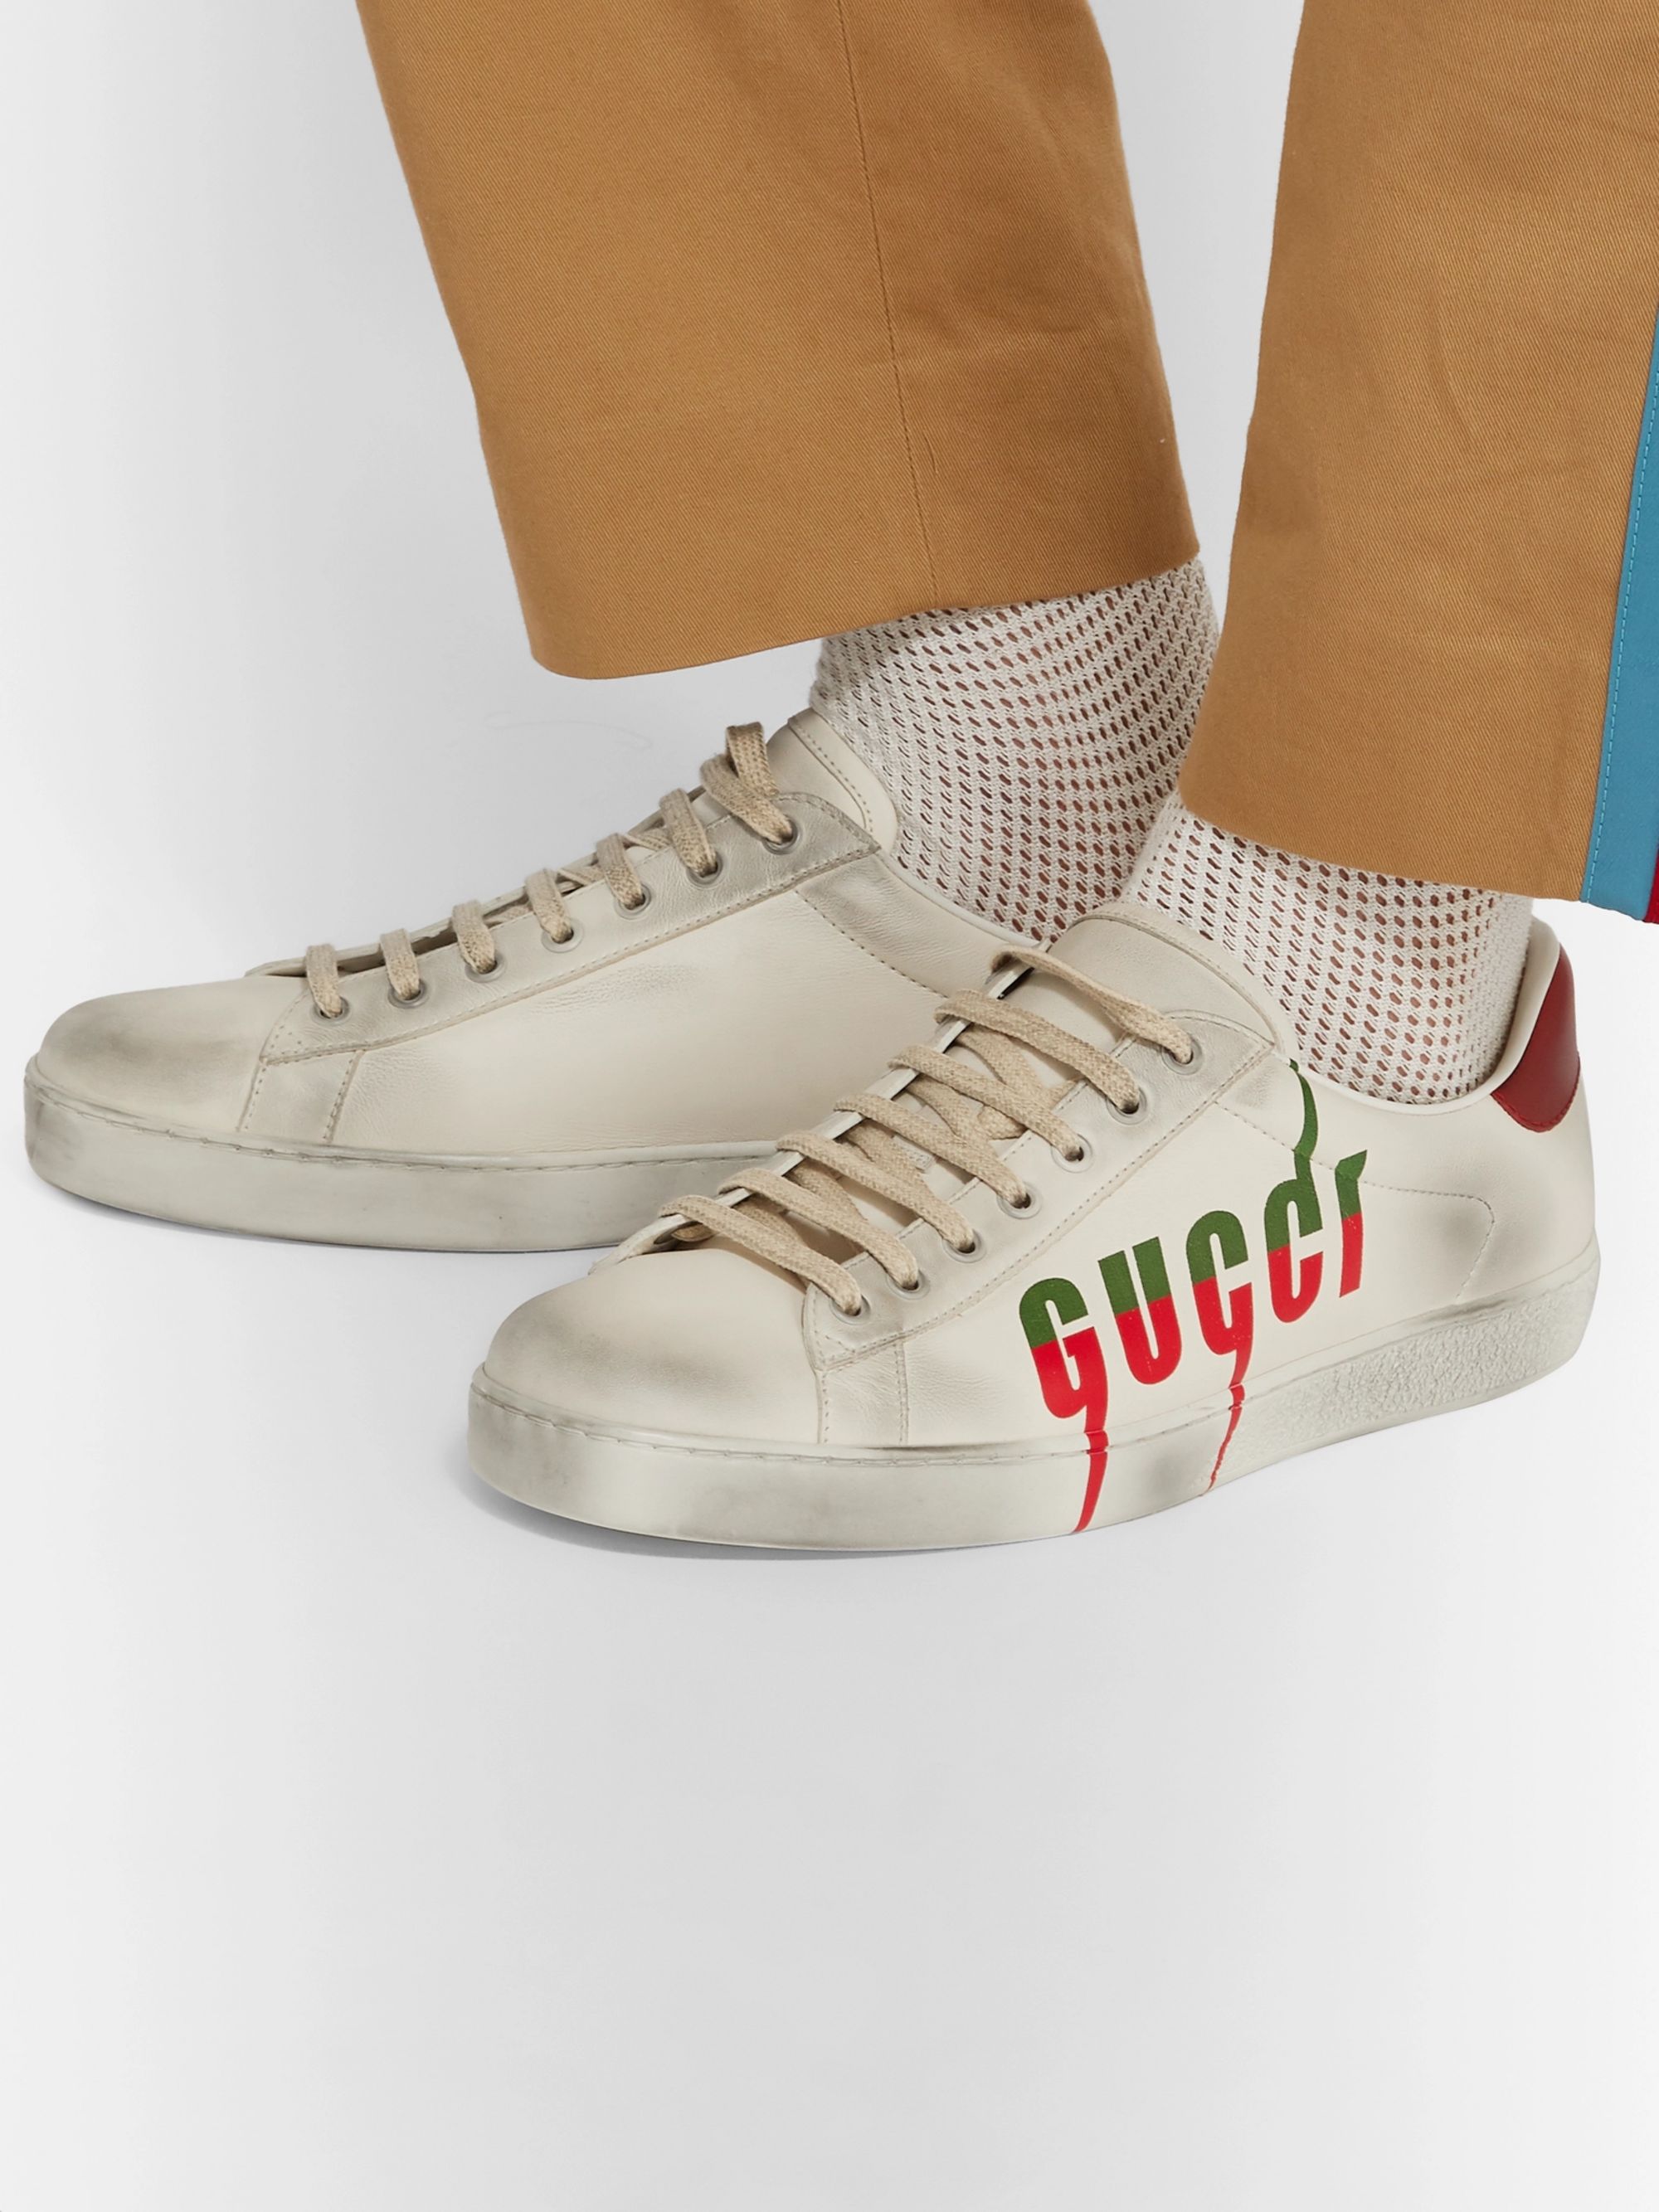 gucci distressed sneakers